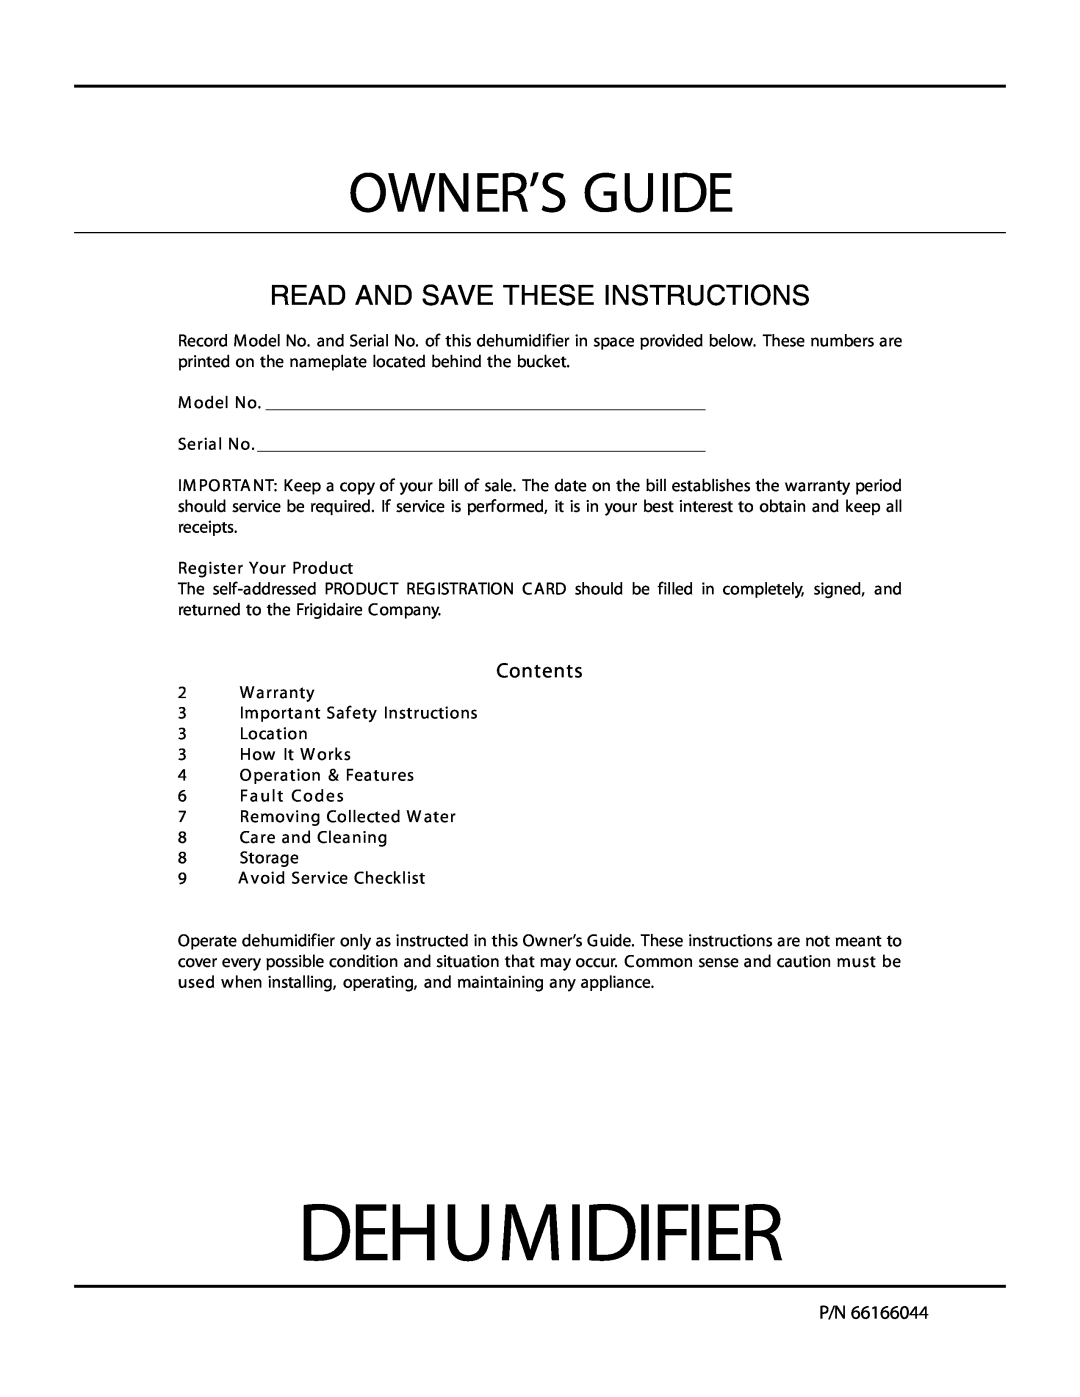 Electrolux 66166044 warranty Dehumidifier, Owner’S Guide, Read And Save These Instructions 